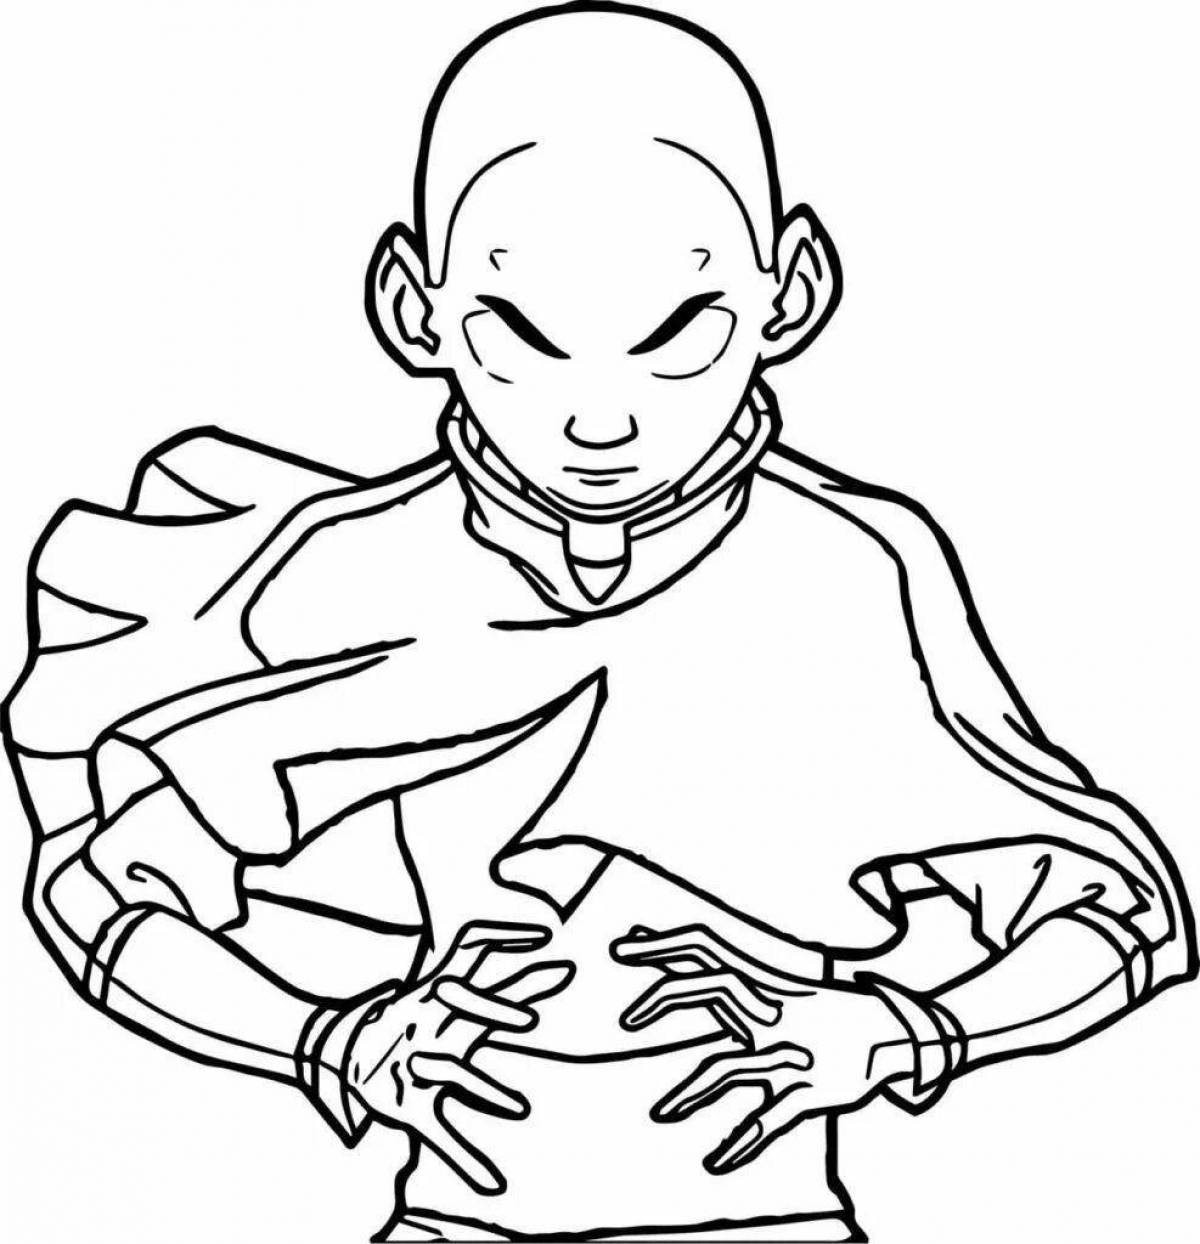 Coloring book brave aang avatar